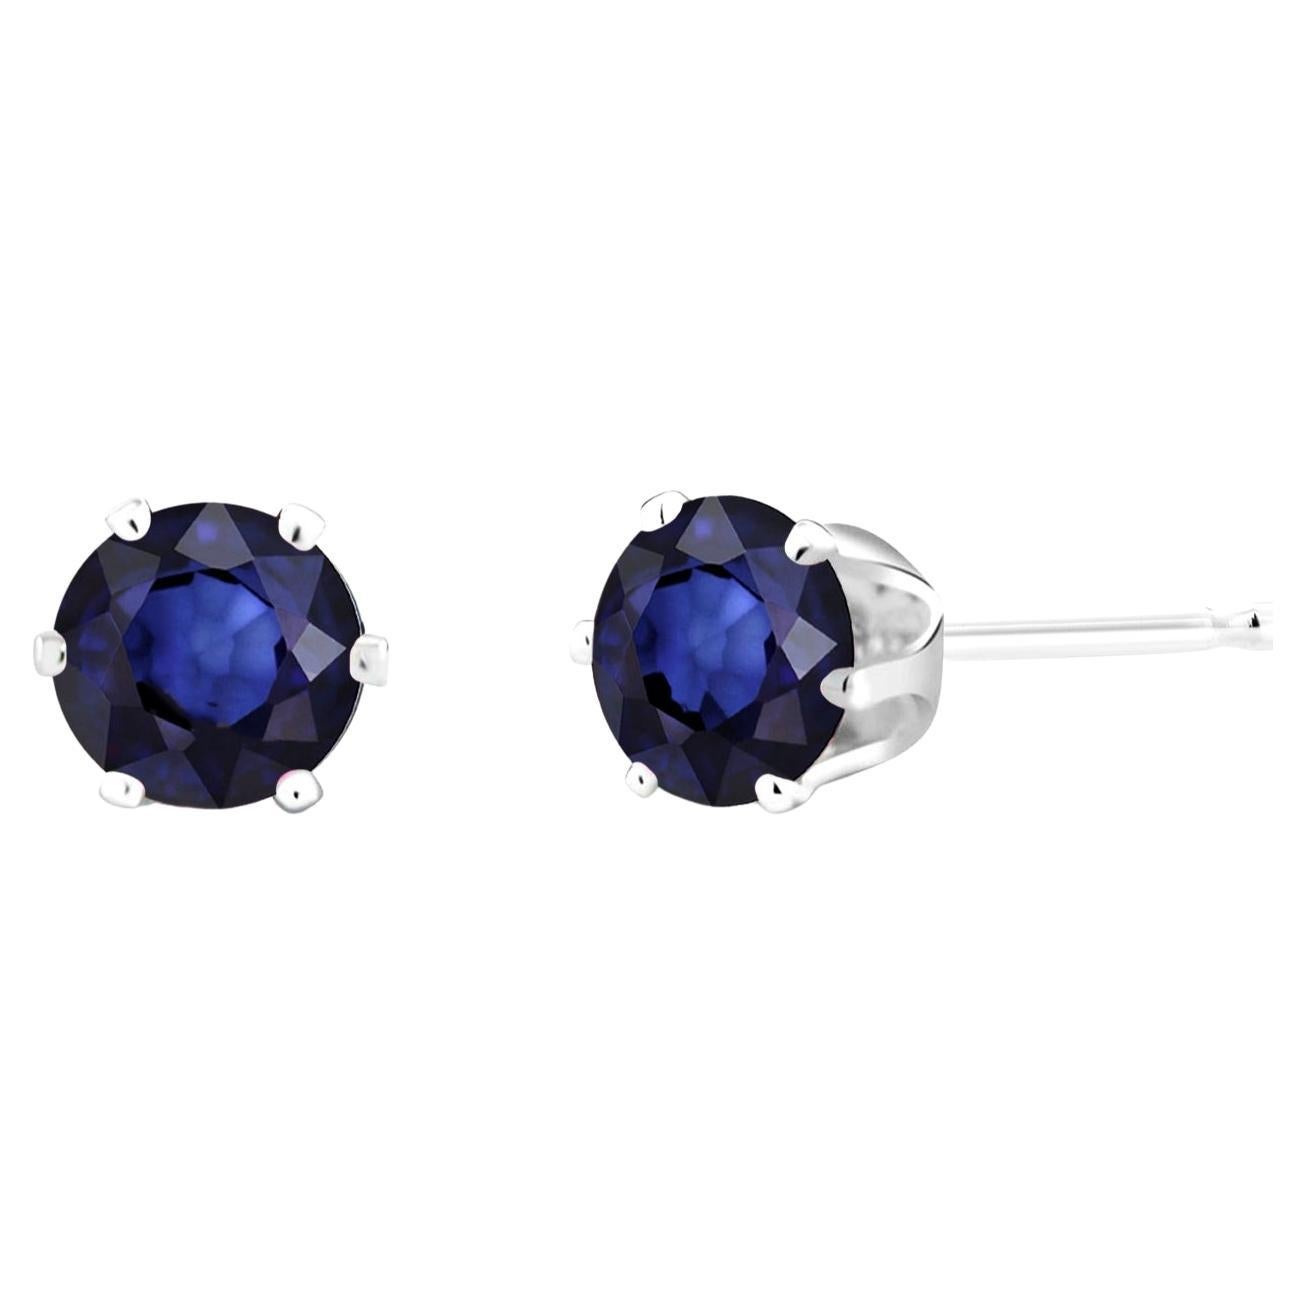 Pair Blue Round Shaped Sapphire White Gold Stud Earrings Weighing 2.00 Carats